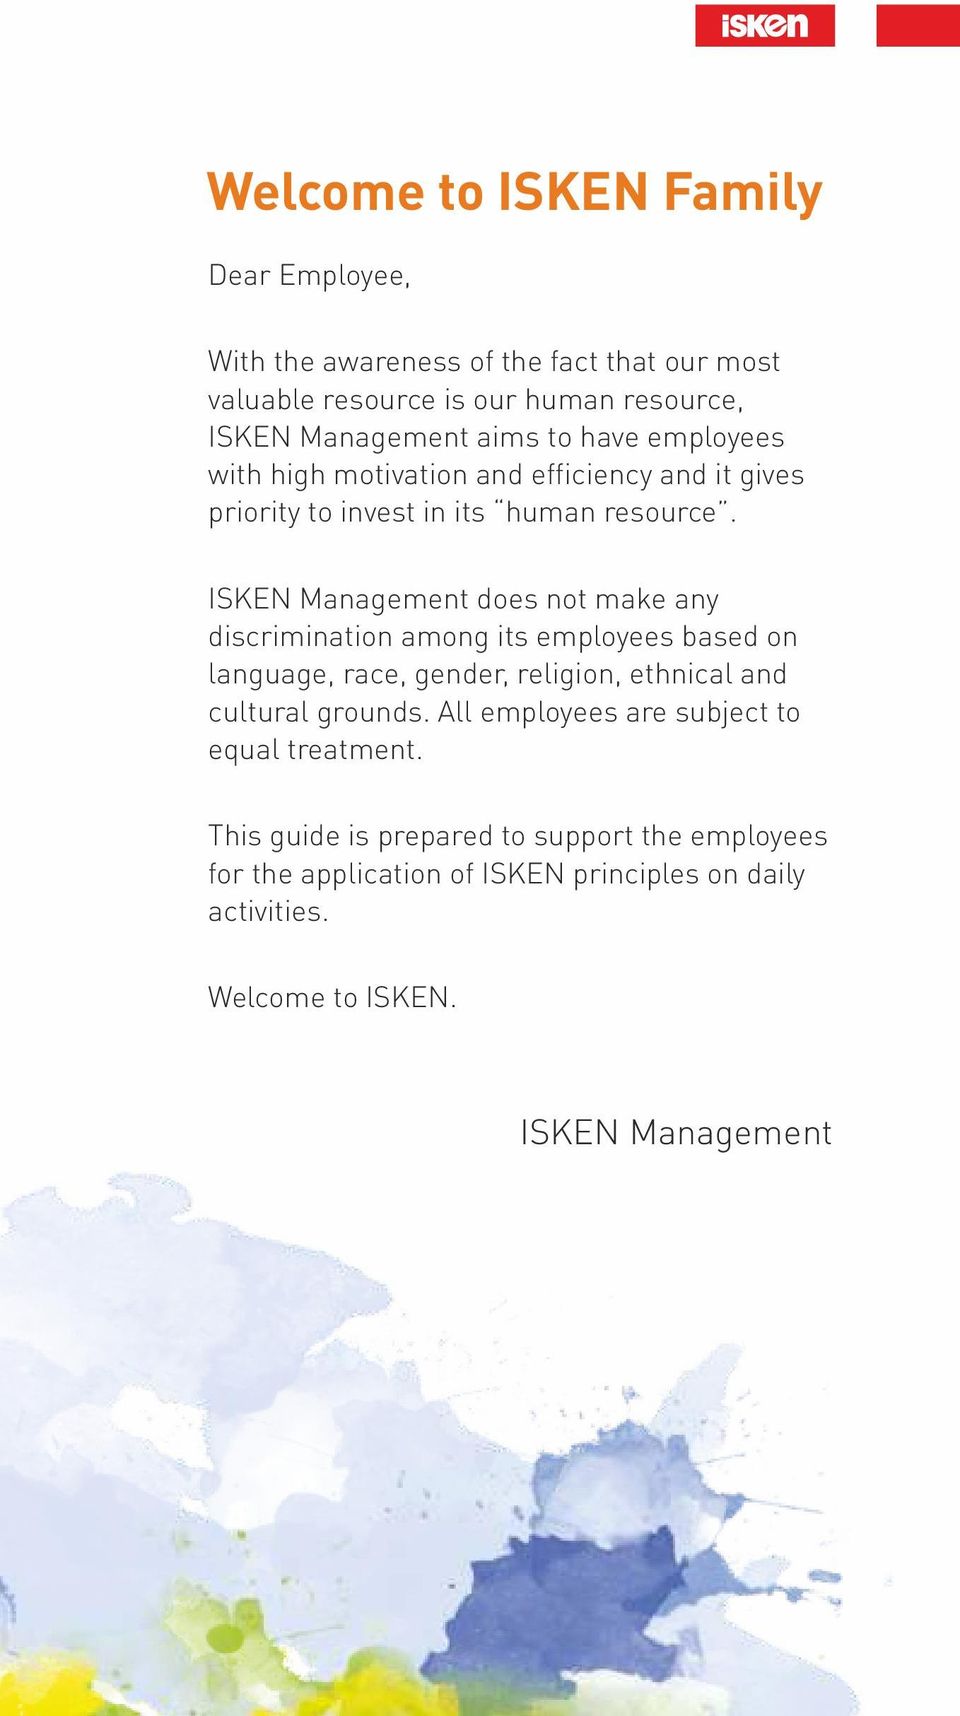 ISKEN Management does not make any discrimination among its employees based on language, race, gender, religion, ethnical and cultural grounds.